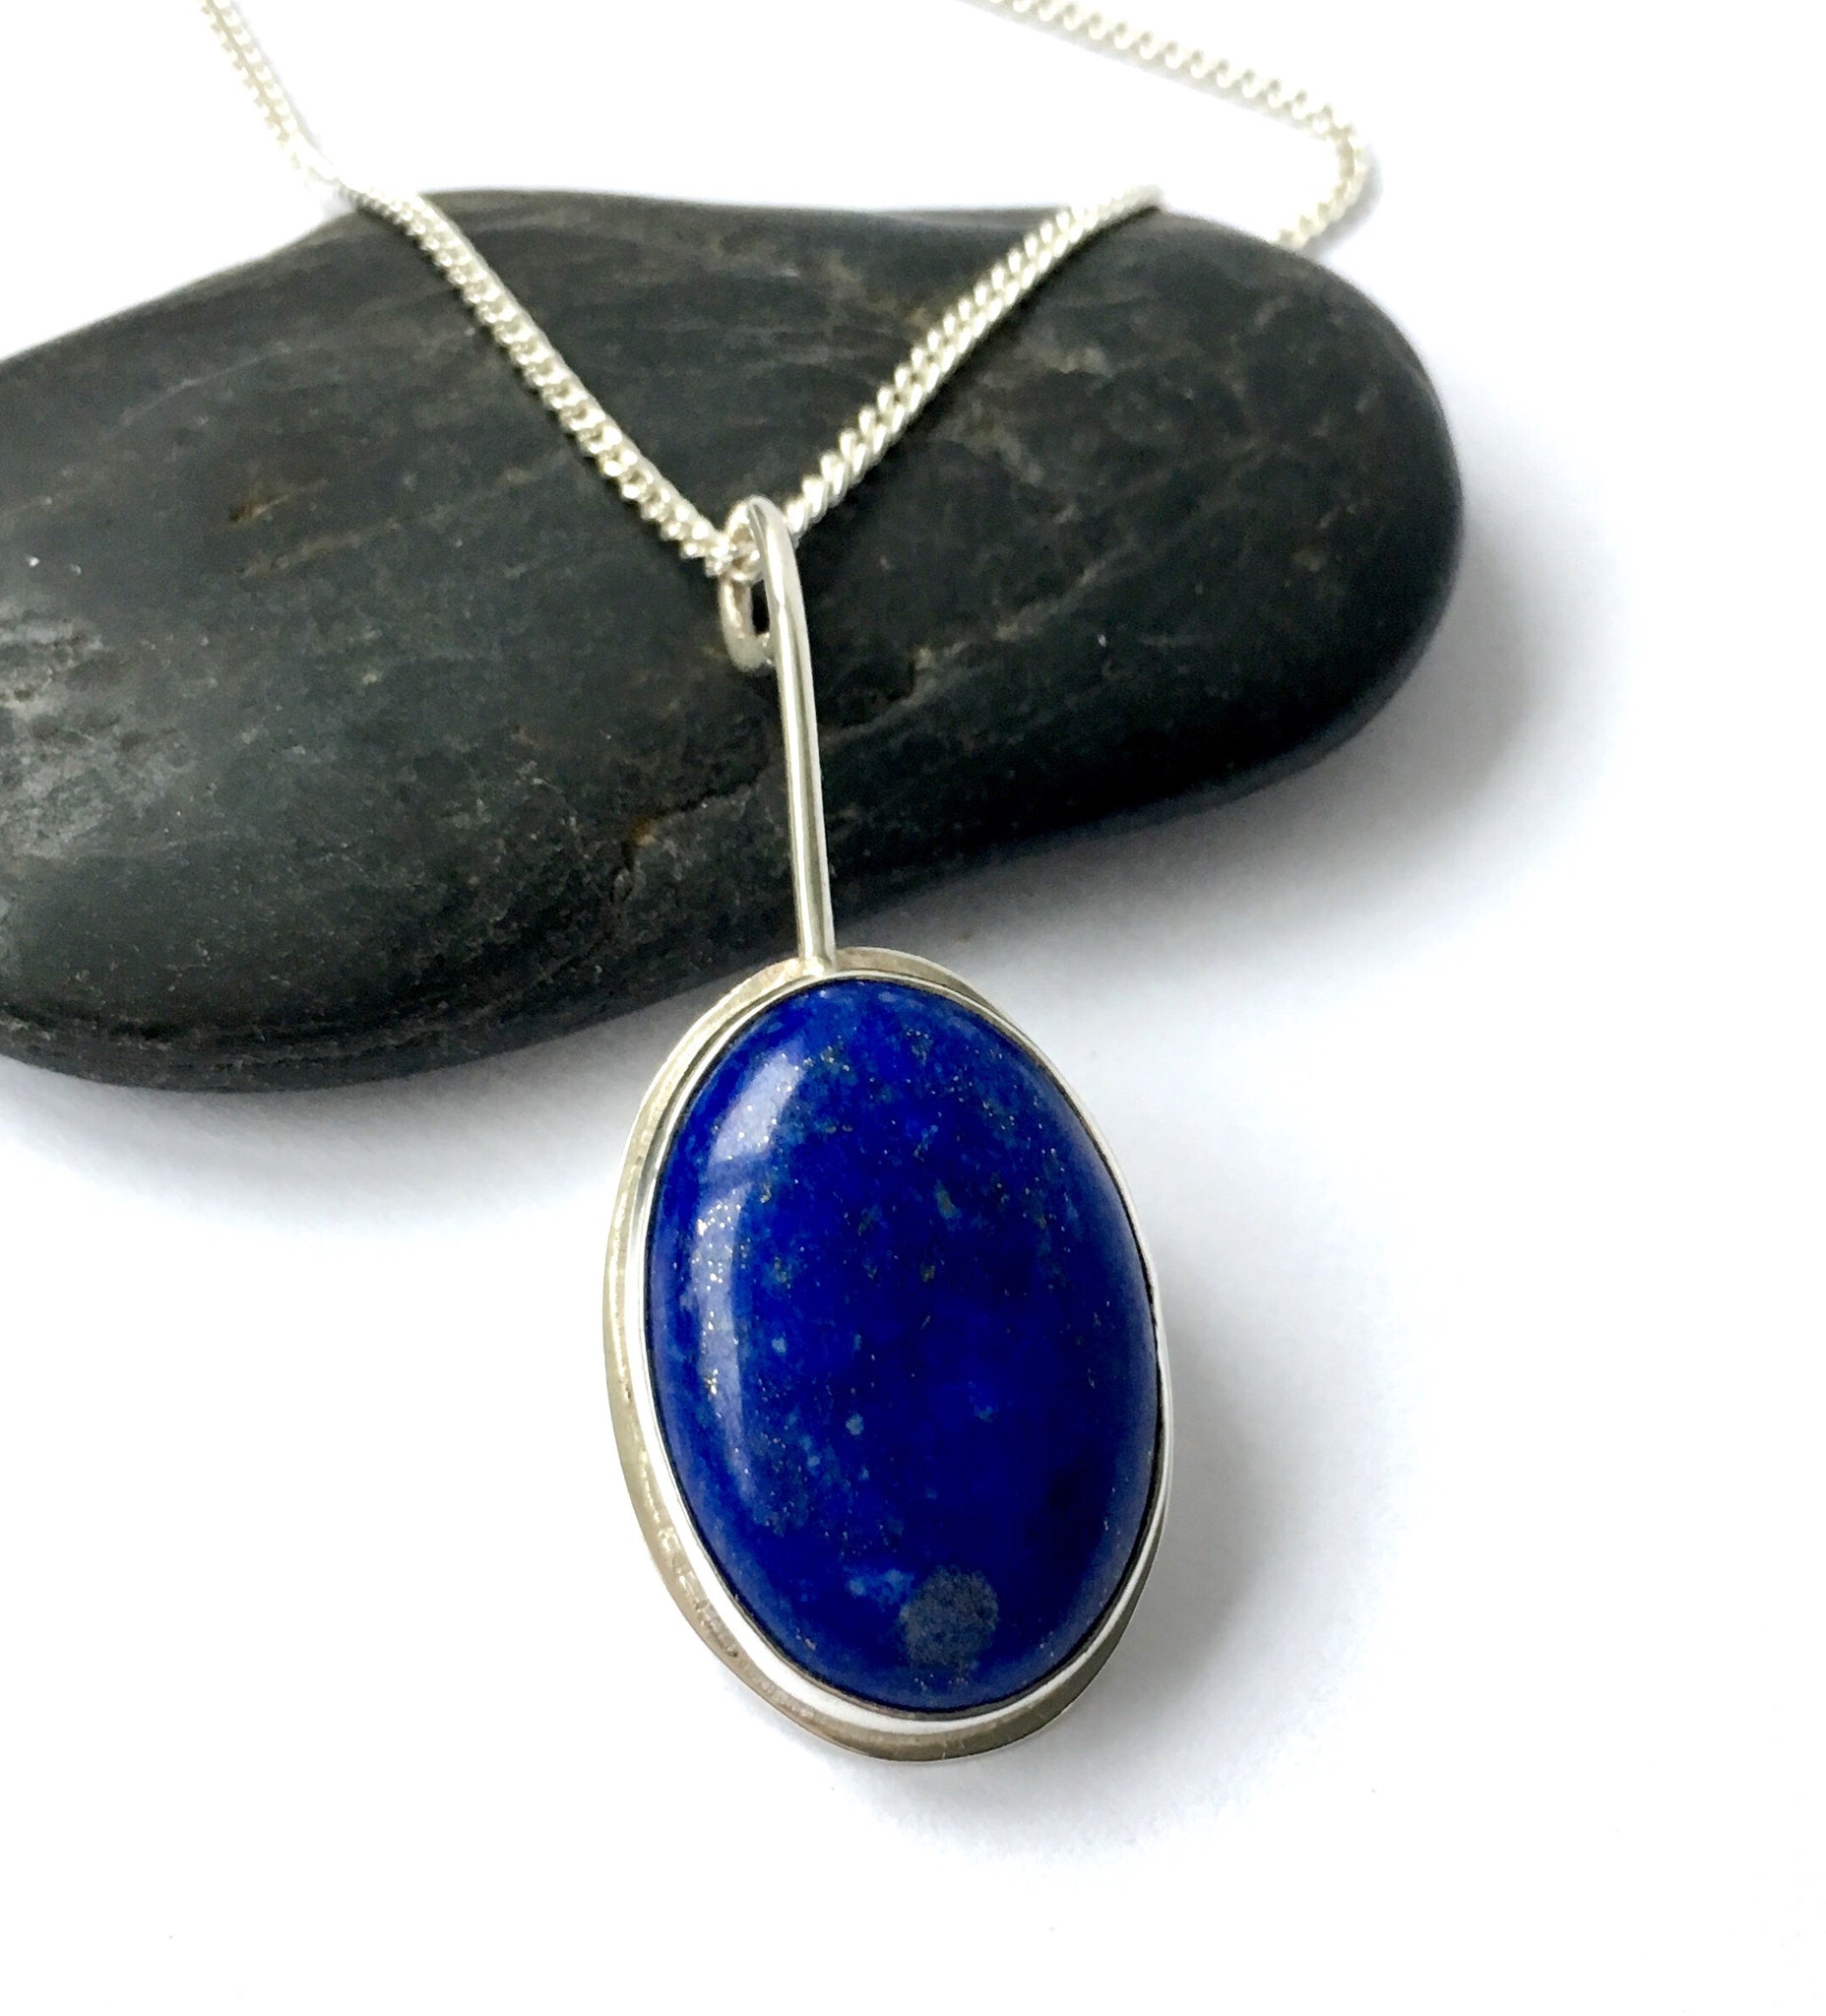 Lapis Lazuli Hand Cut in a Handmade Sterling Silver Oval Pendant Necklace. - Glitter and Gem Jewellery